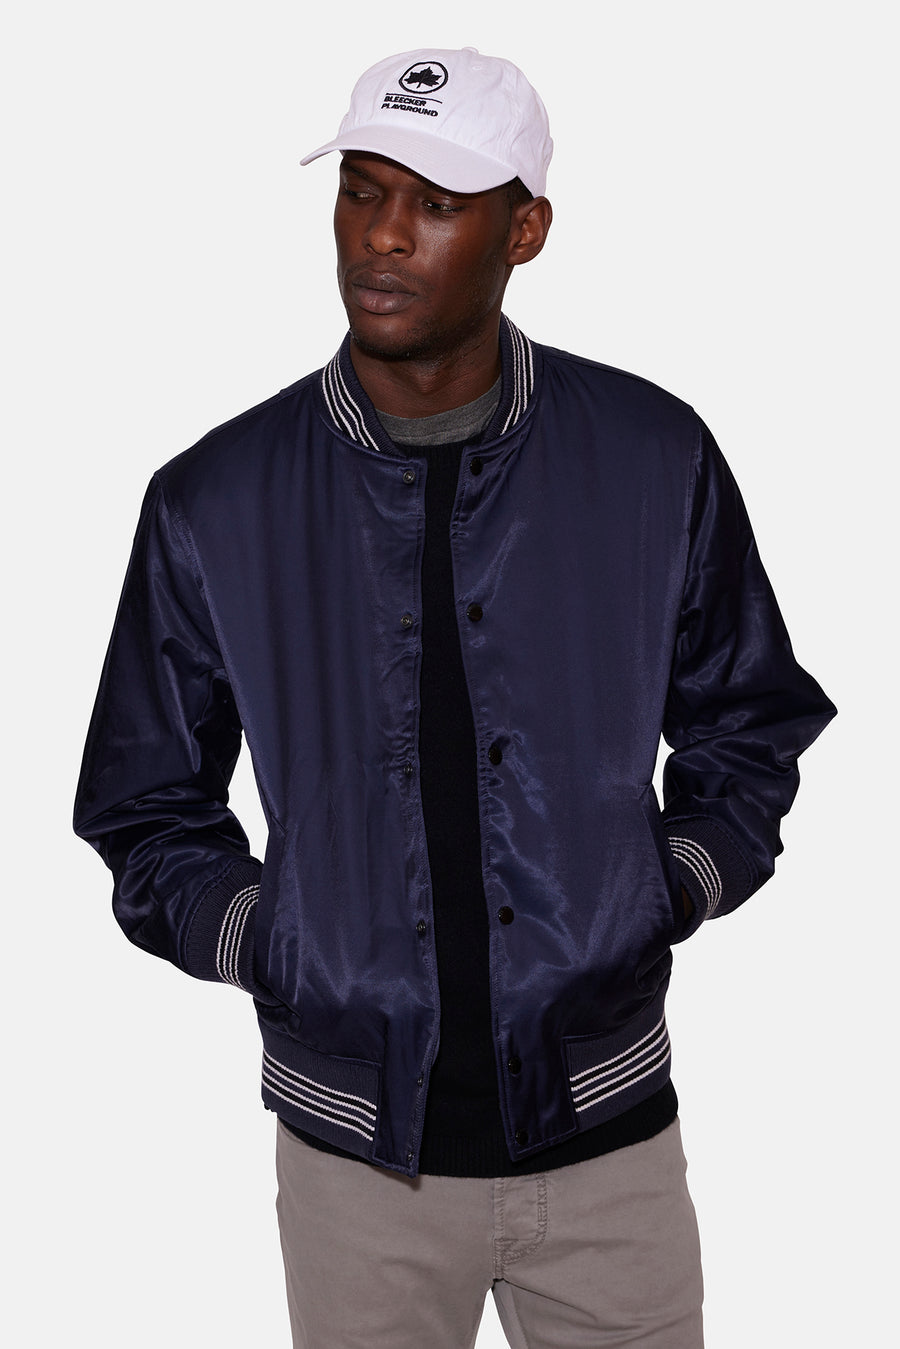 Rag & Bone Dugout Satin Jacket Salute in Blue, Size Small - Outerwear